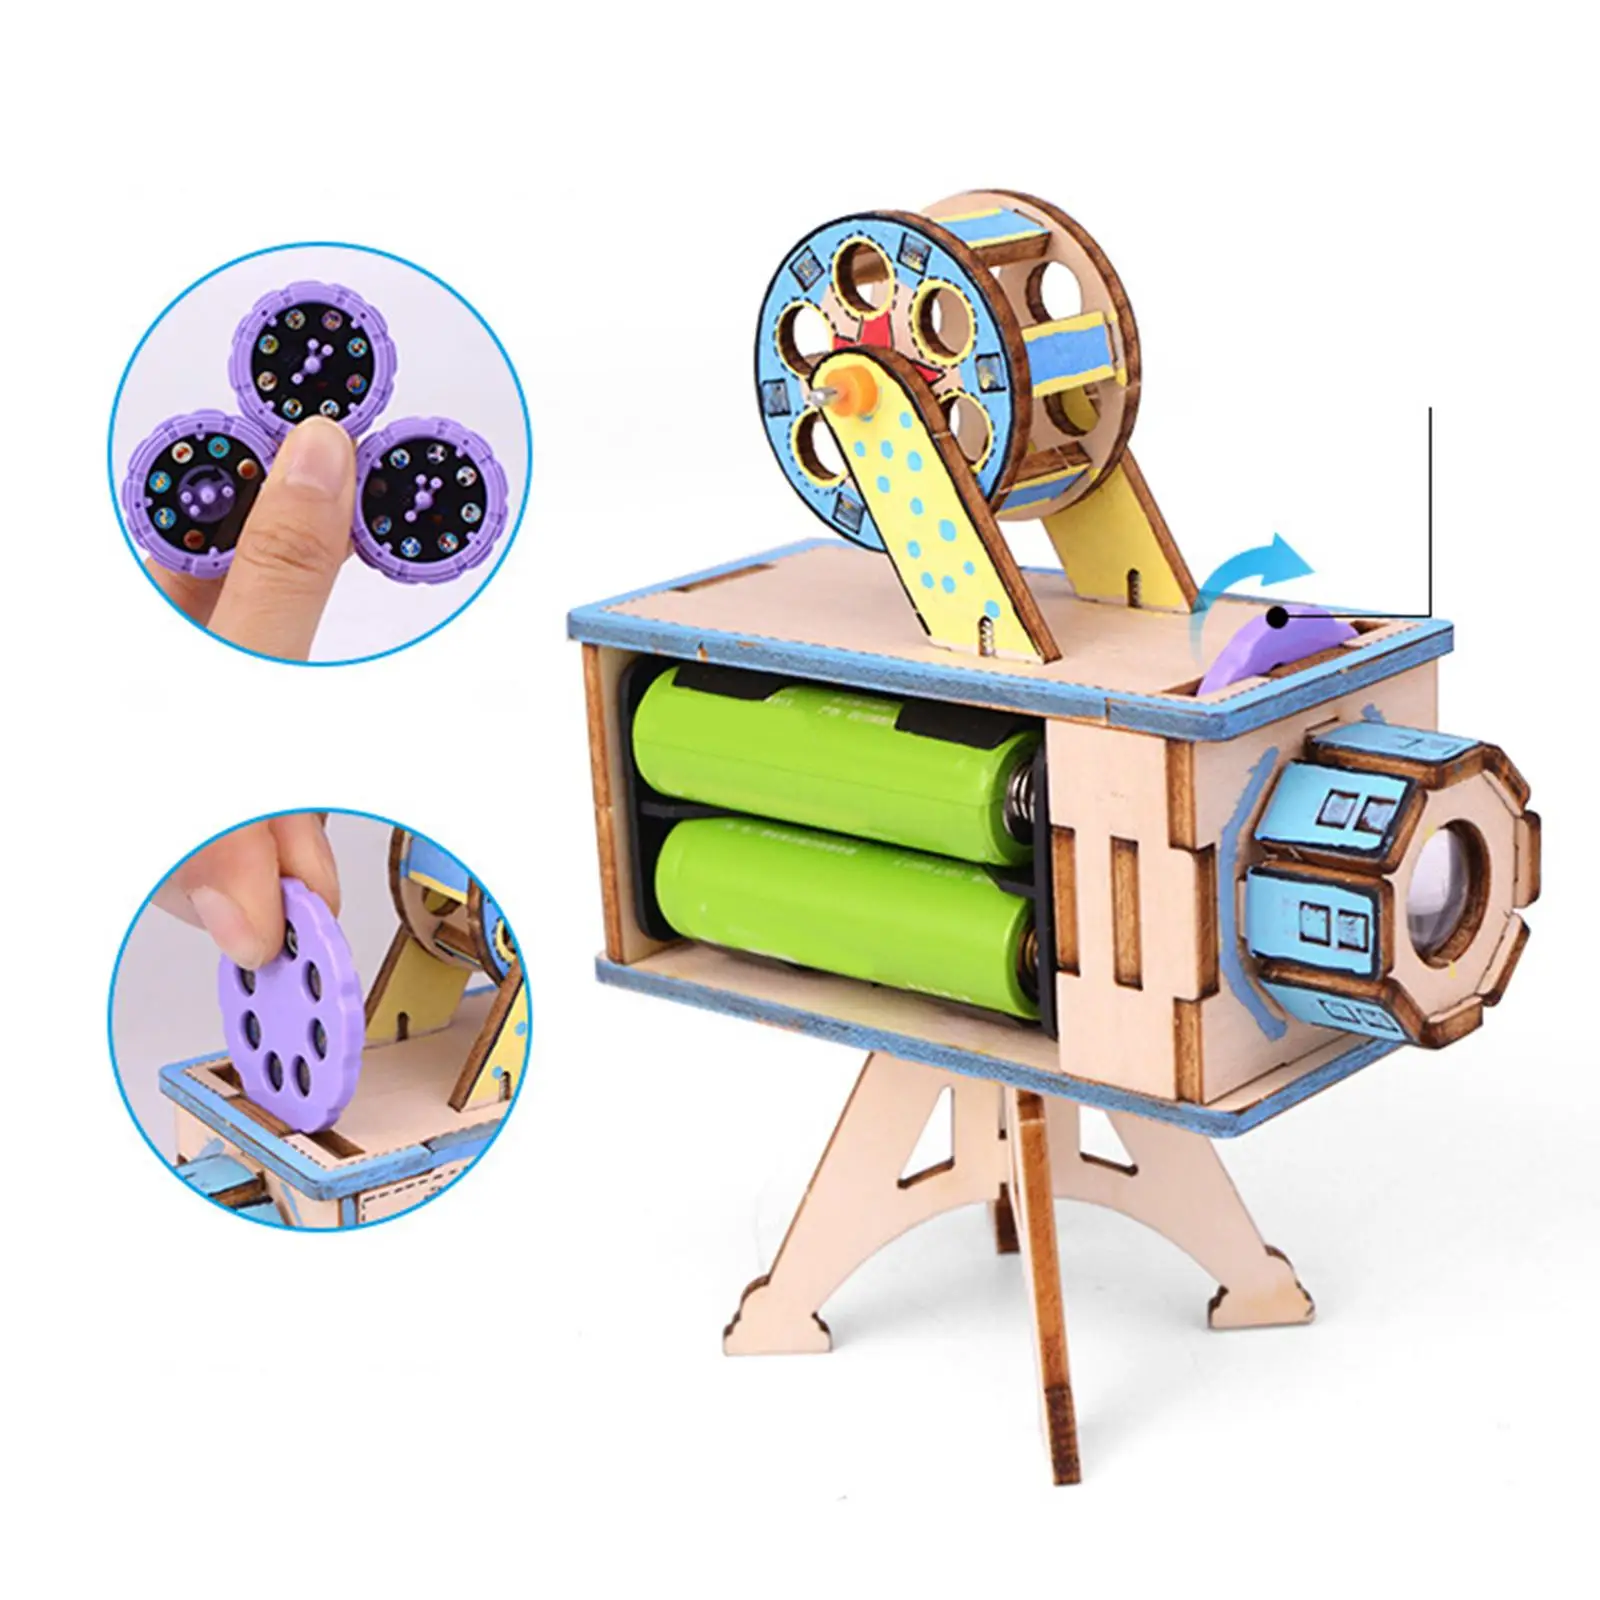 

DIY Wooden Science Experiment Model Kit Projector Developing Intelligent 3D Puzzle for Children Age 8 9 10 11 12 Years Old Gifts